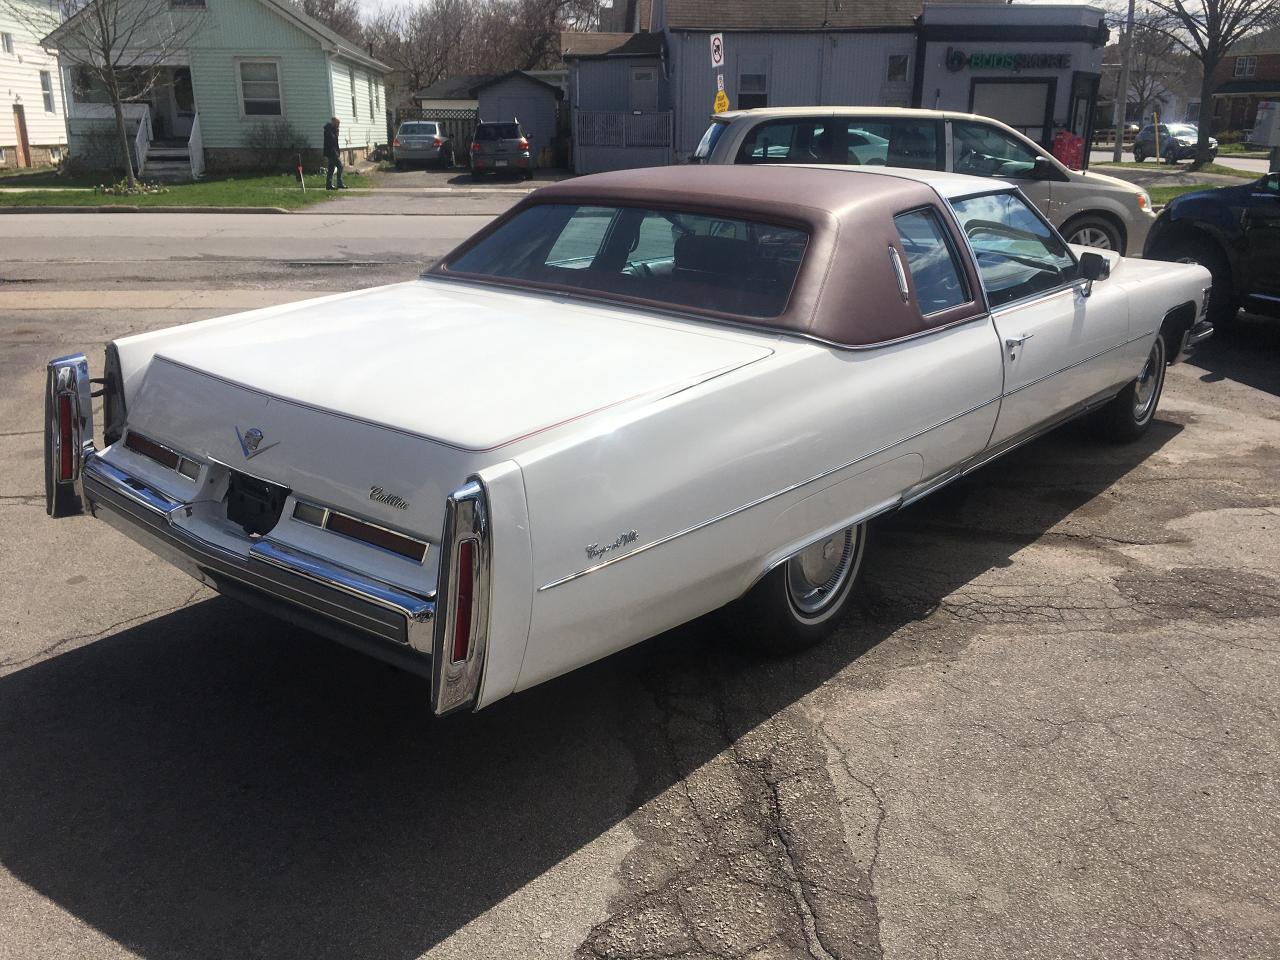 1976 Cadillac Coupe De Ville Documented Original Mileage (Stored 22 Years) - Photo #3